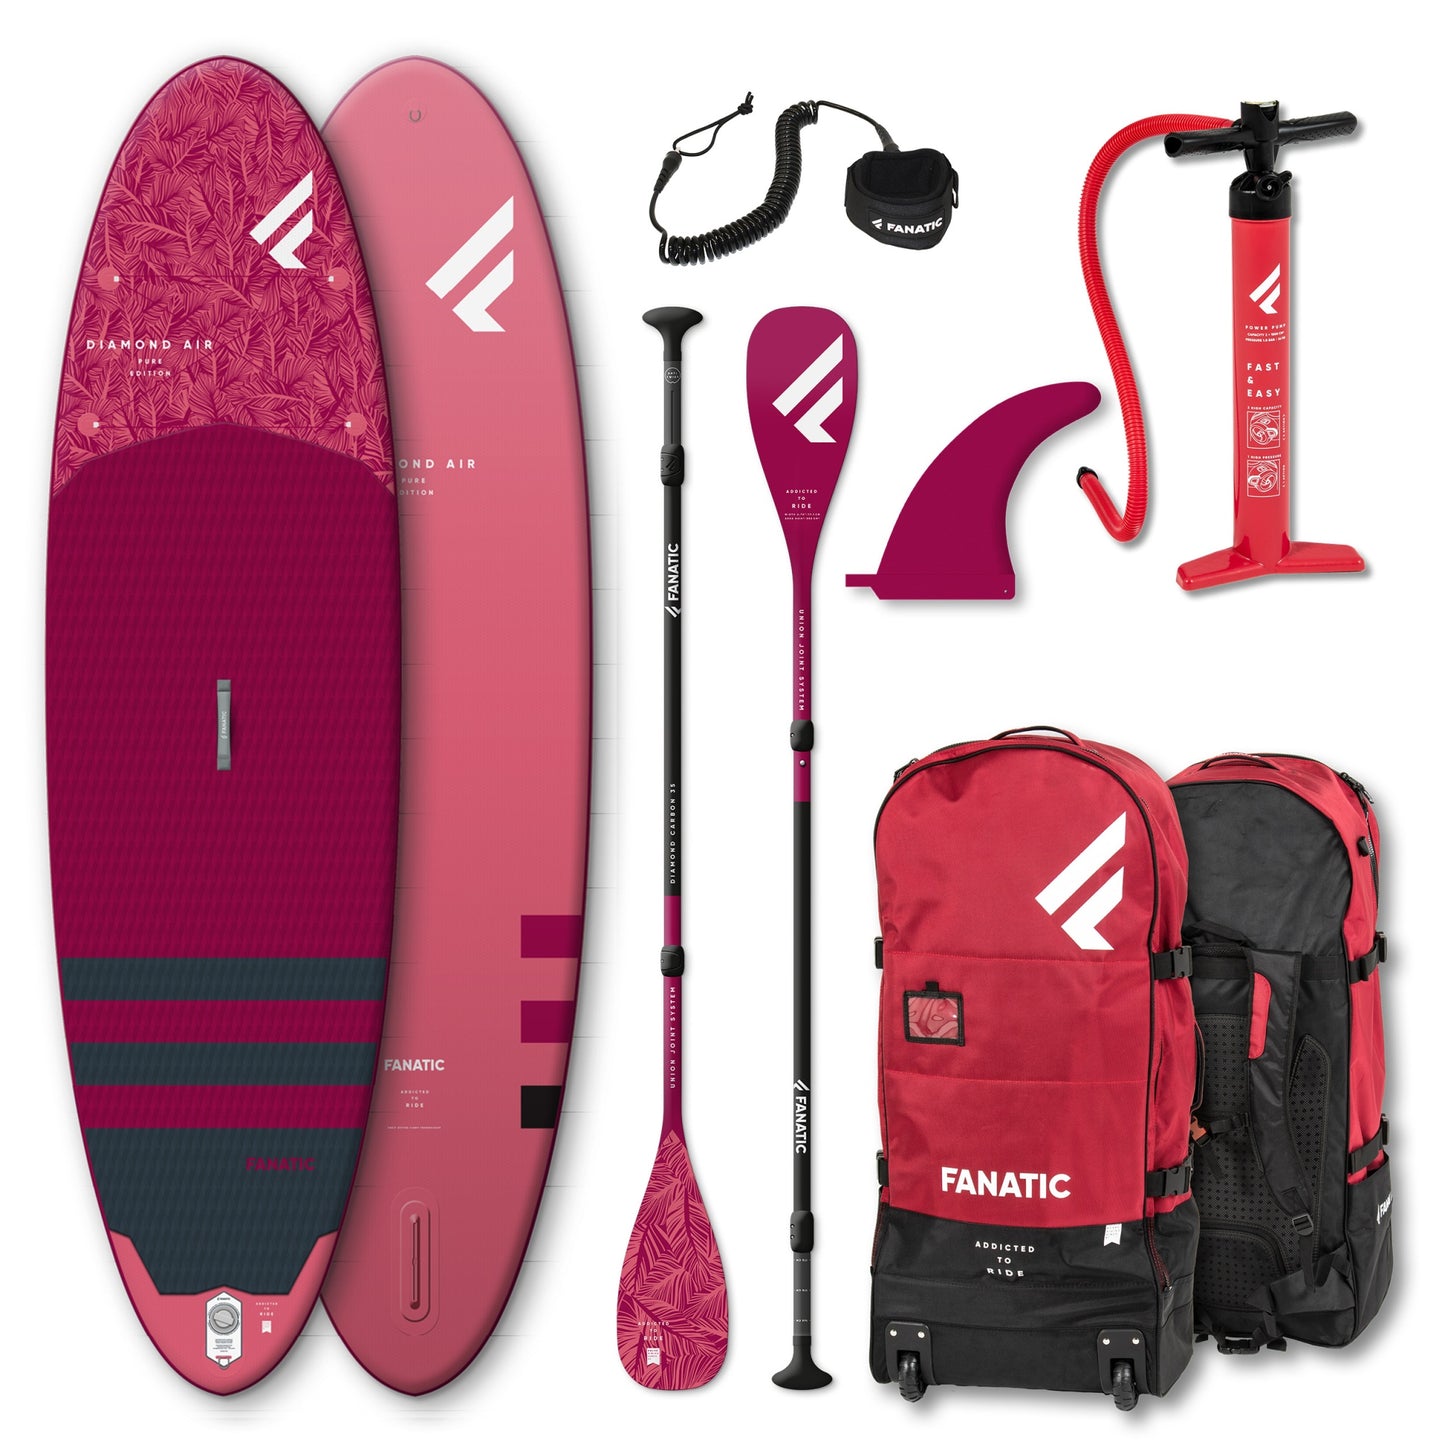 Fanatic iSUP Package Diamond Air – SUP Package